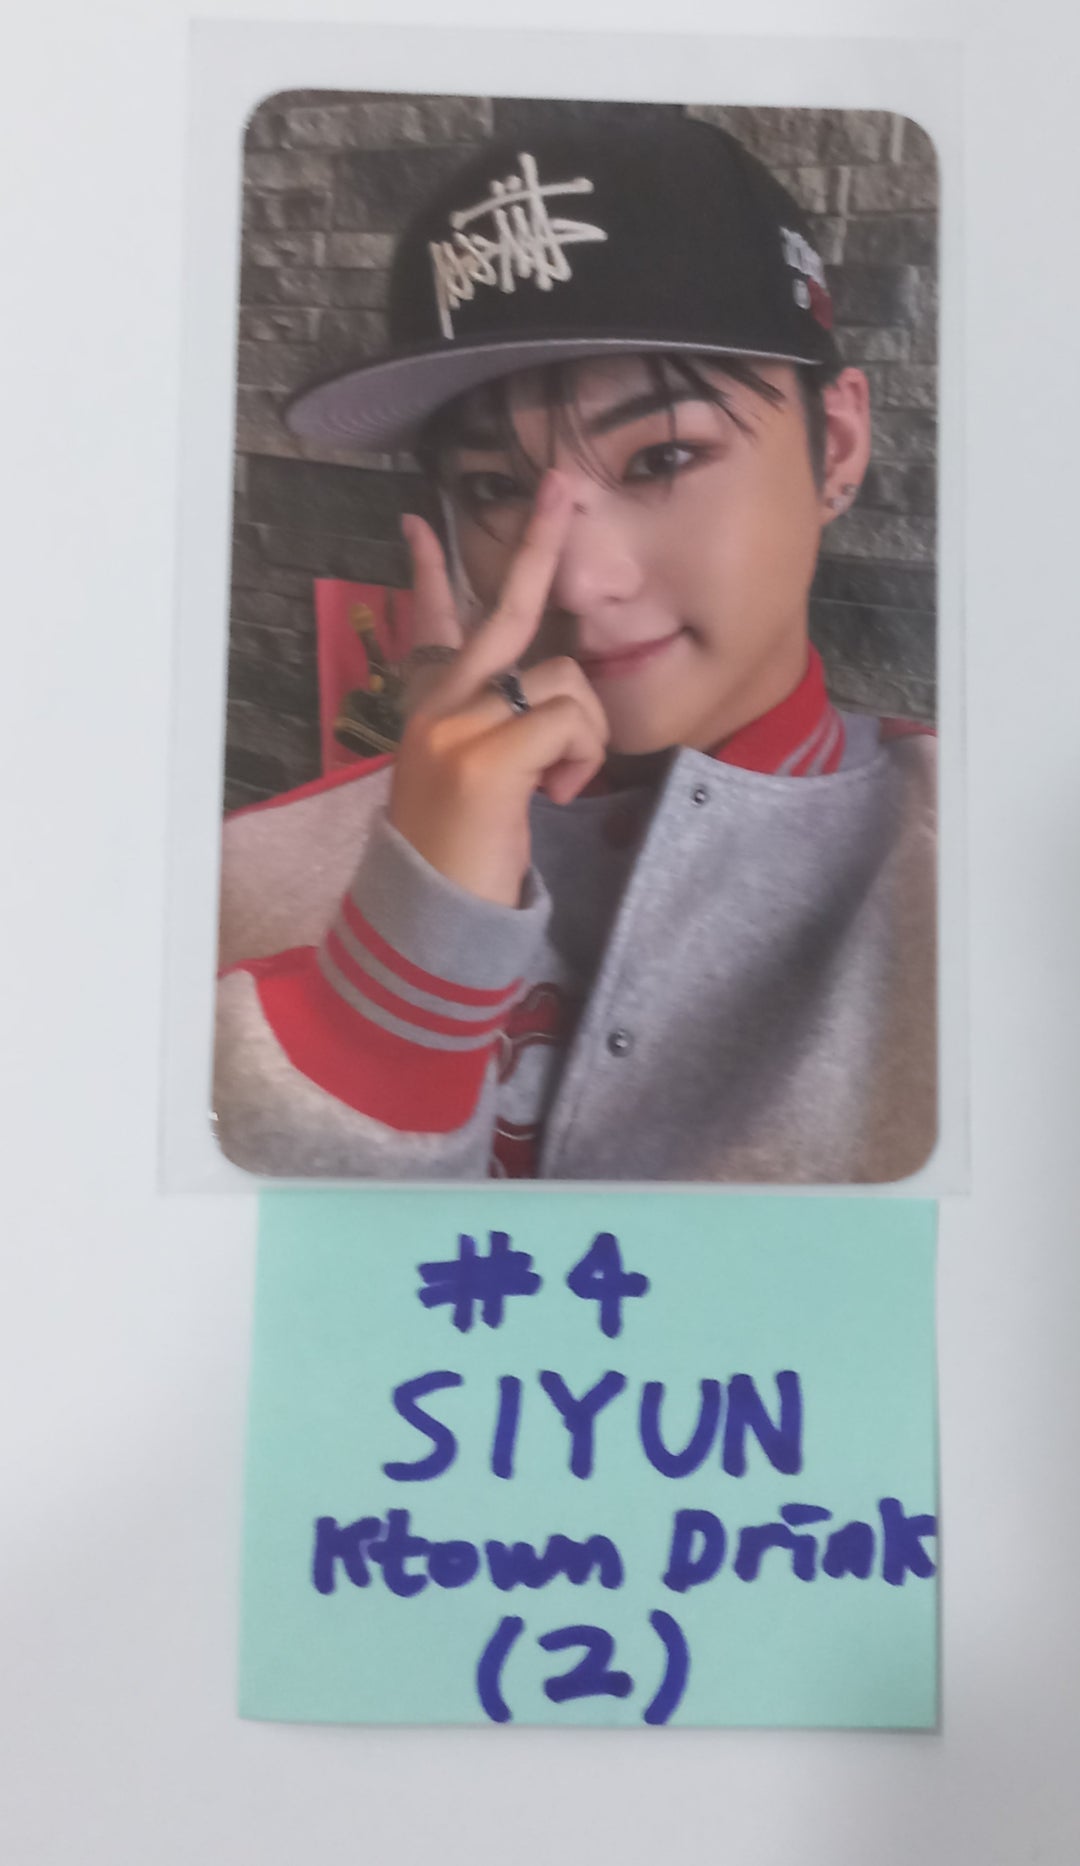 AMPERS&ONE "ONE HEARTED" - Ktown4U Drink Event Photocard [24.3.28]